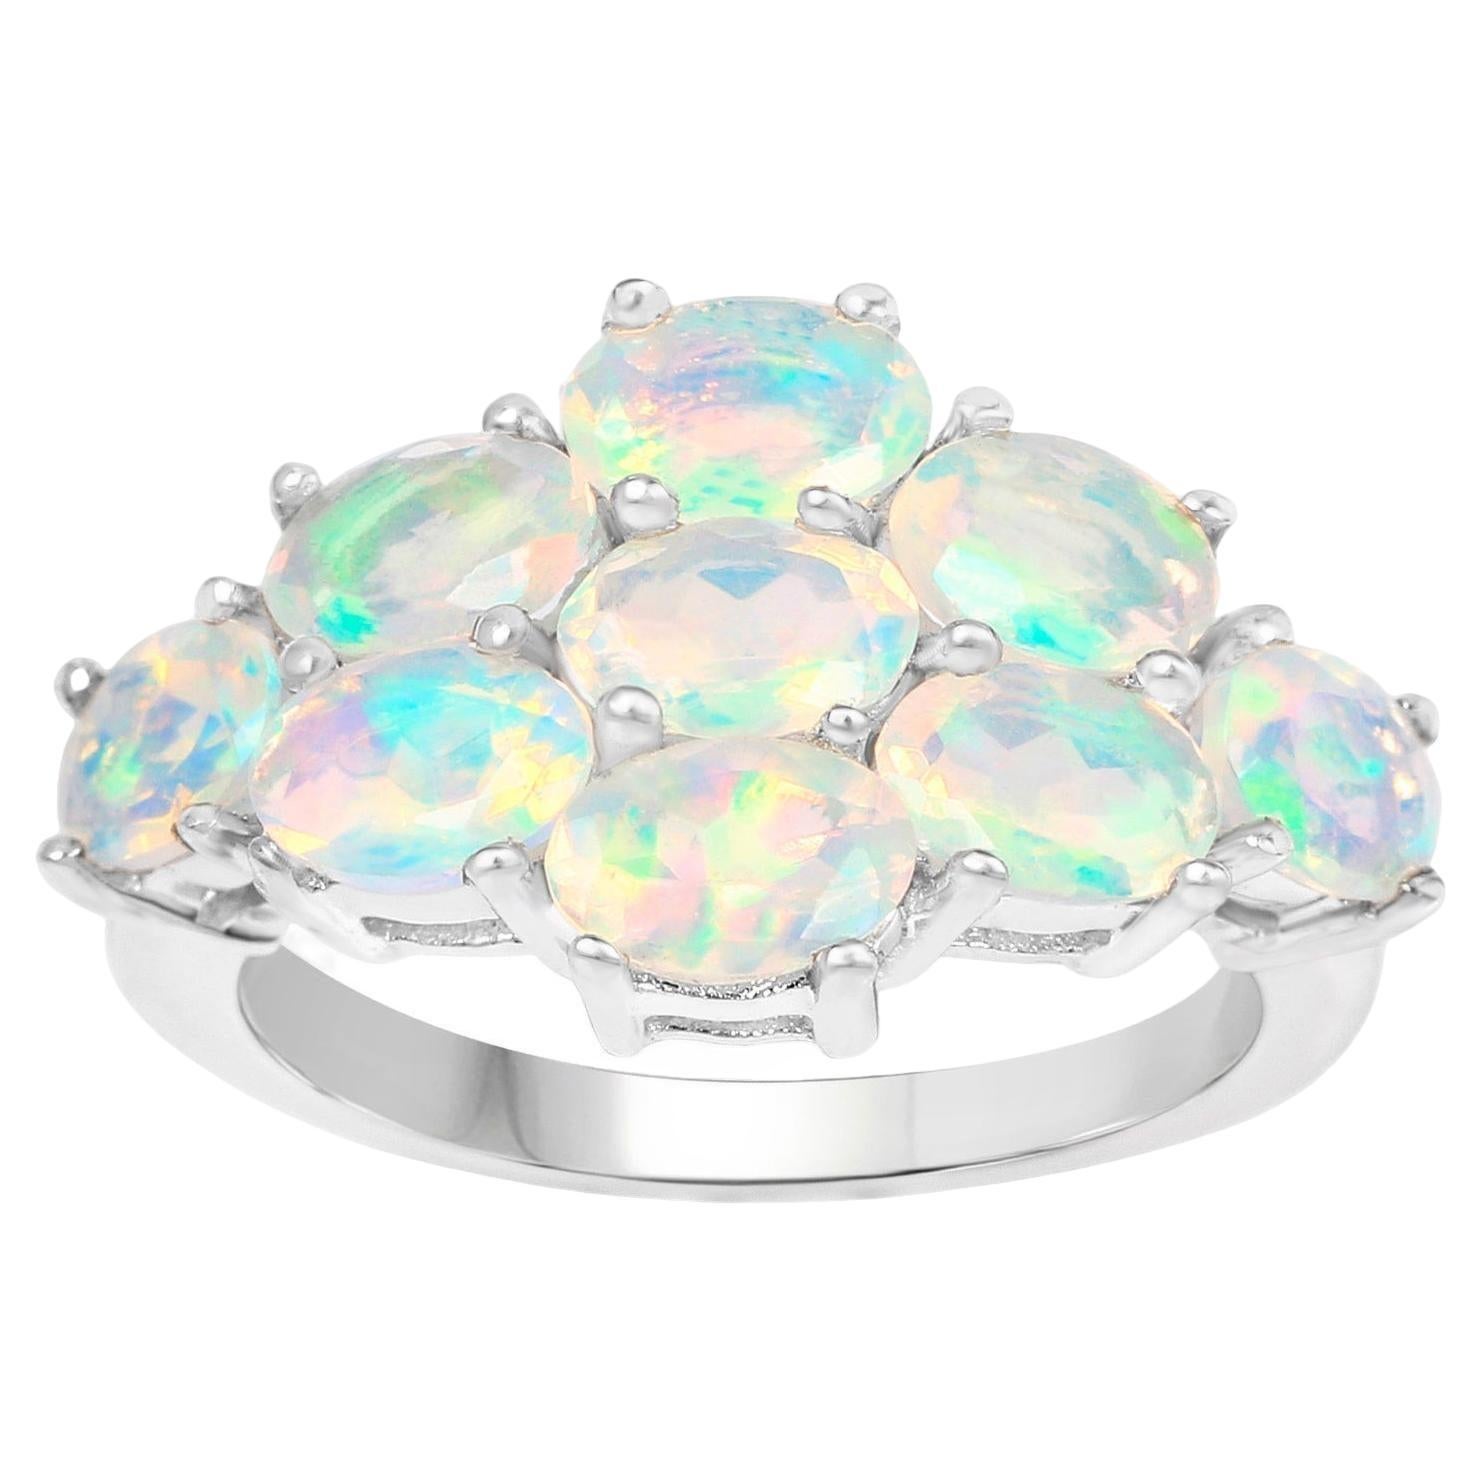 Faceted 2.15 Carats Ethiopian Opal Cluster Ring Sterling Silver For Sale